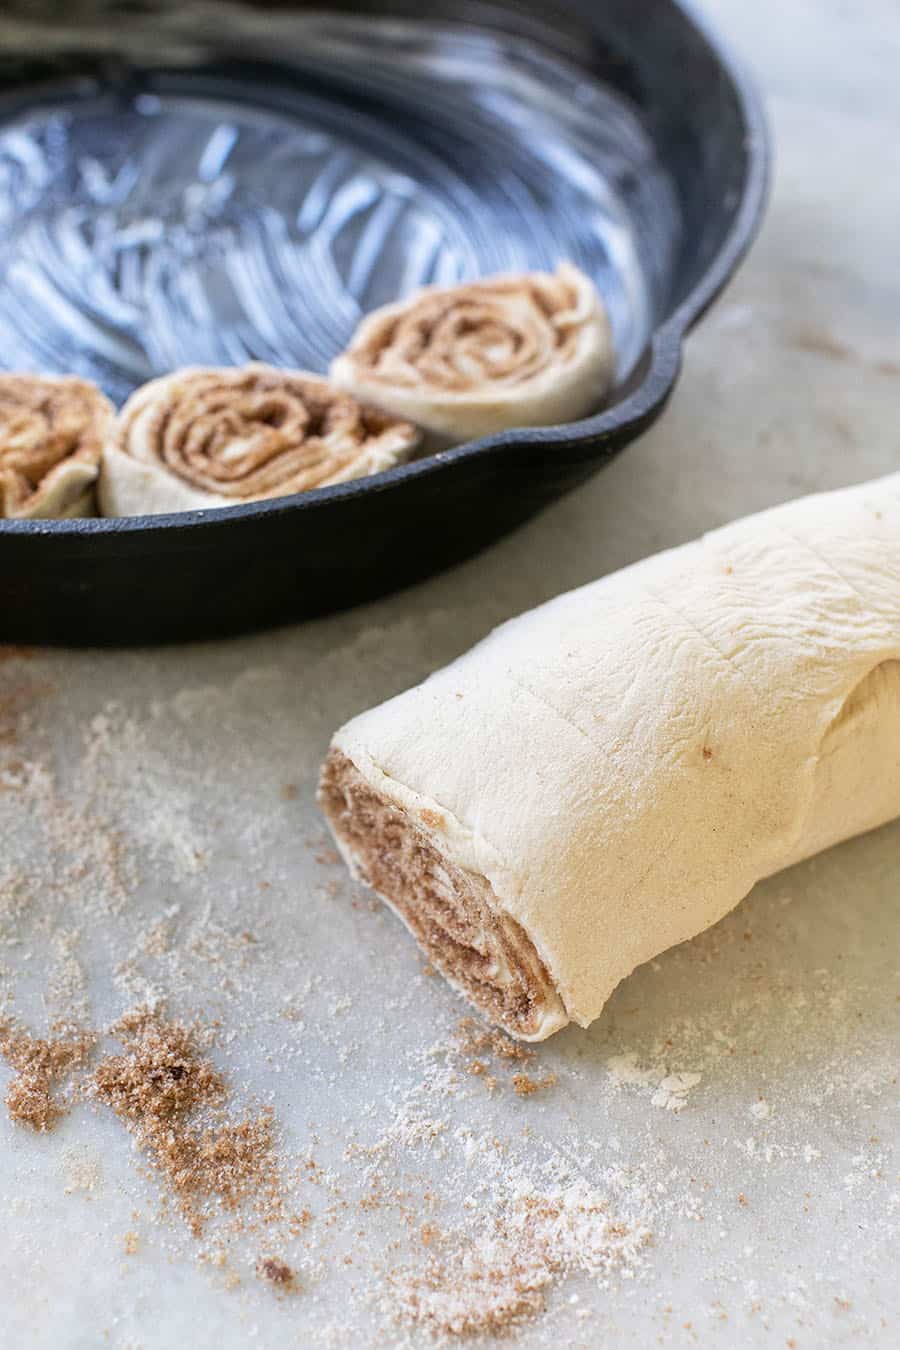 Rolling up a cinnamon rolls to put into a pan to bake